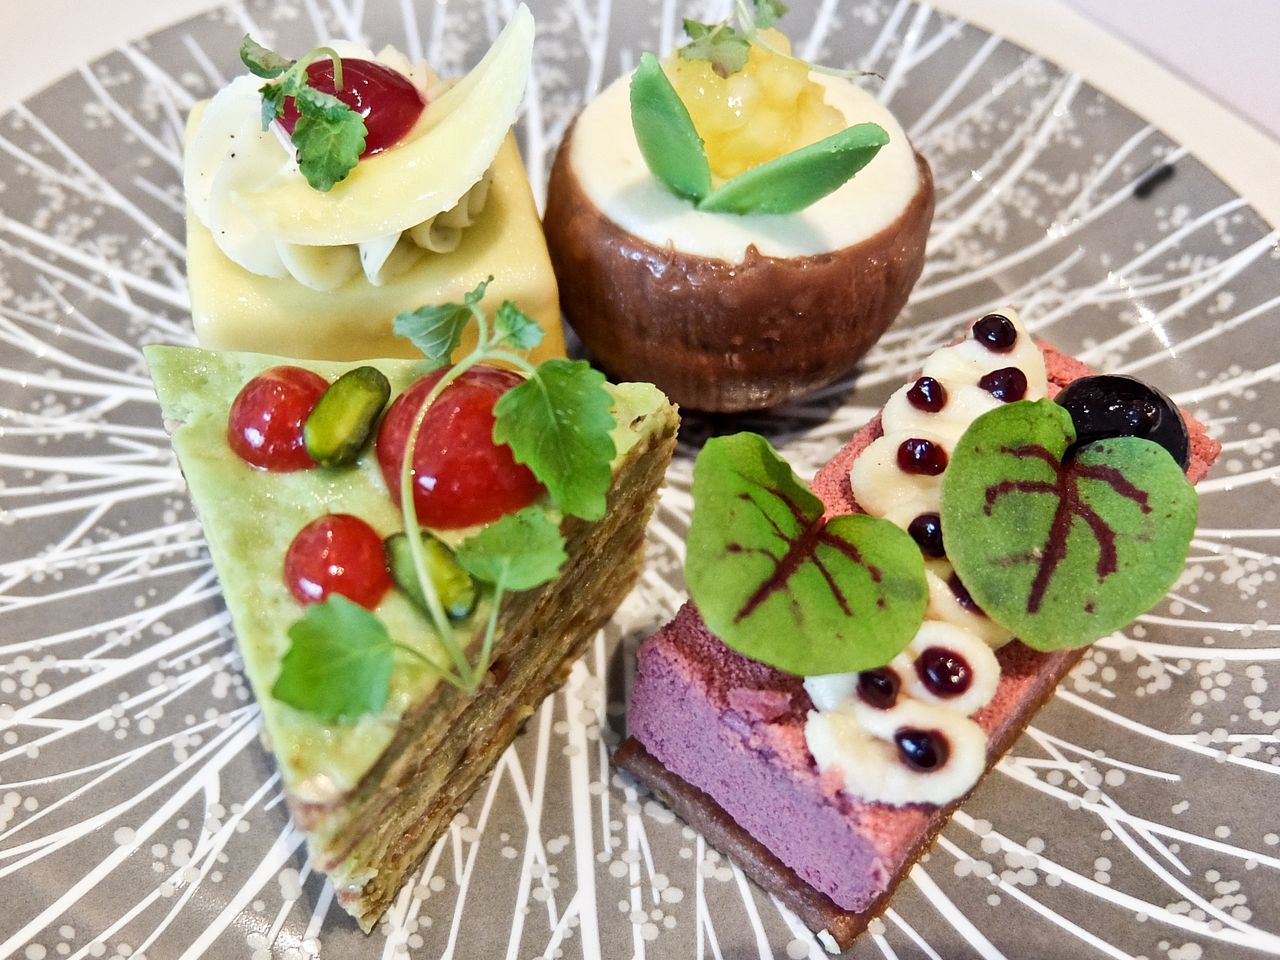 Afternoon Tea fit for Royalty at InterContinental London Park Lane